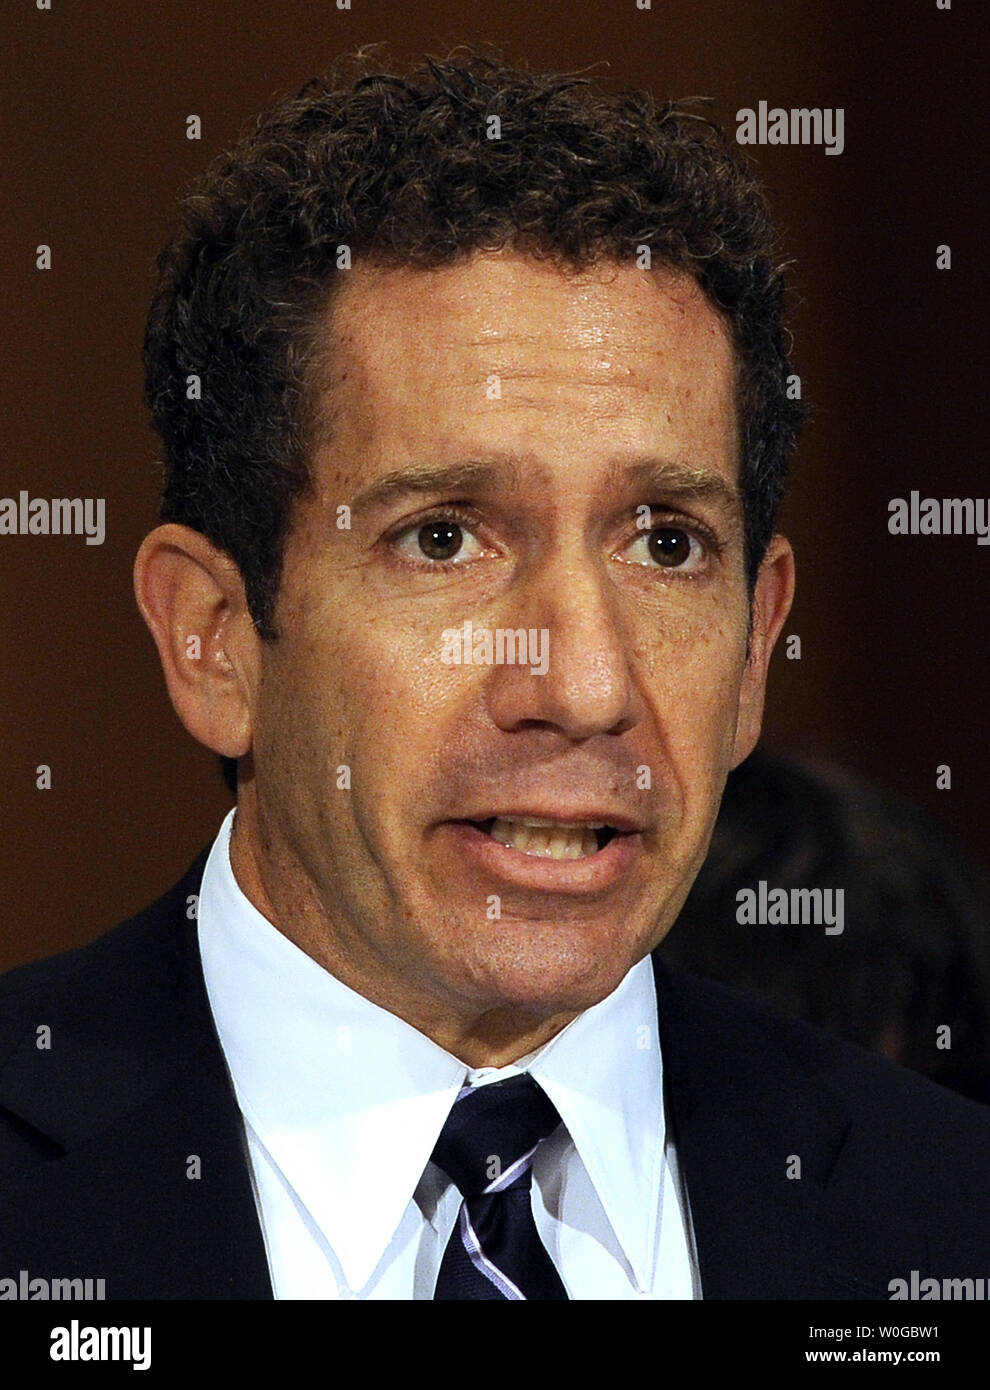 Gregory Karawan appears before the Senate Banking, Housing and Urban Affairs Committee regarding his nomination to the Securities Investor Protection Corporation on Capitol Hill in Washington, DC, on June 14, 2011.    UPI/Roger L. Wollenberg Stock Photo